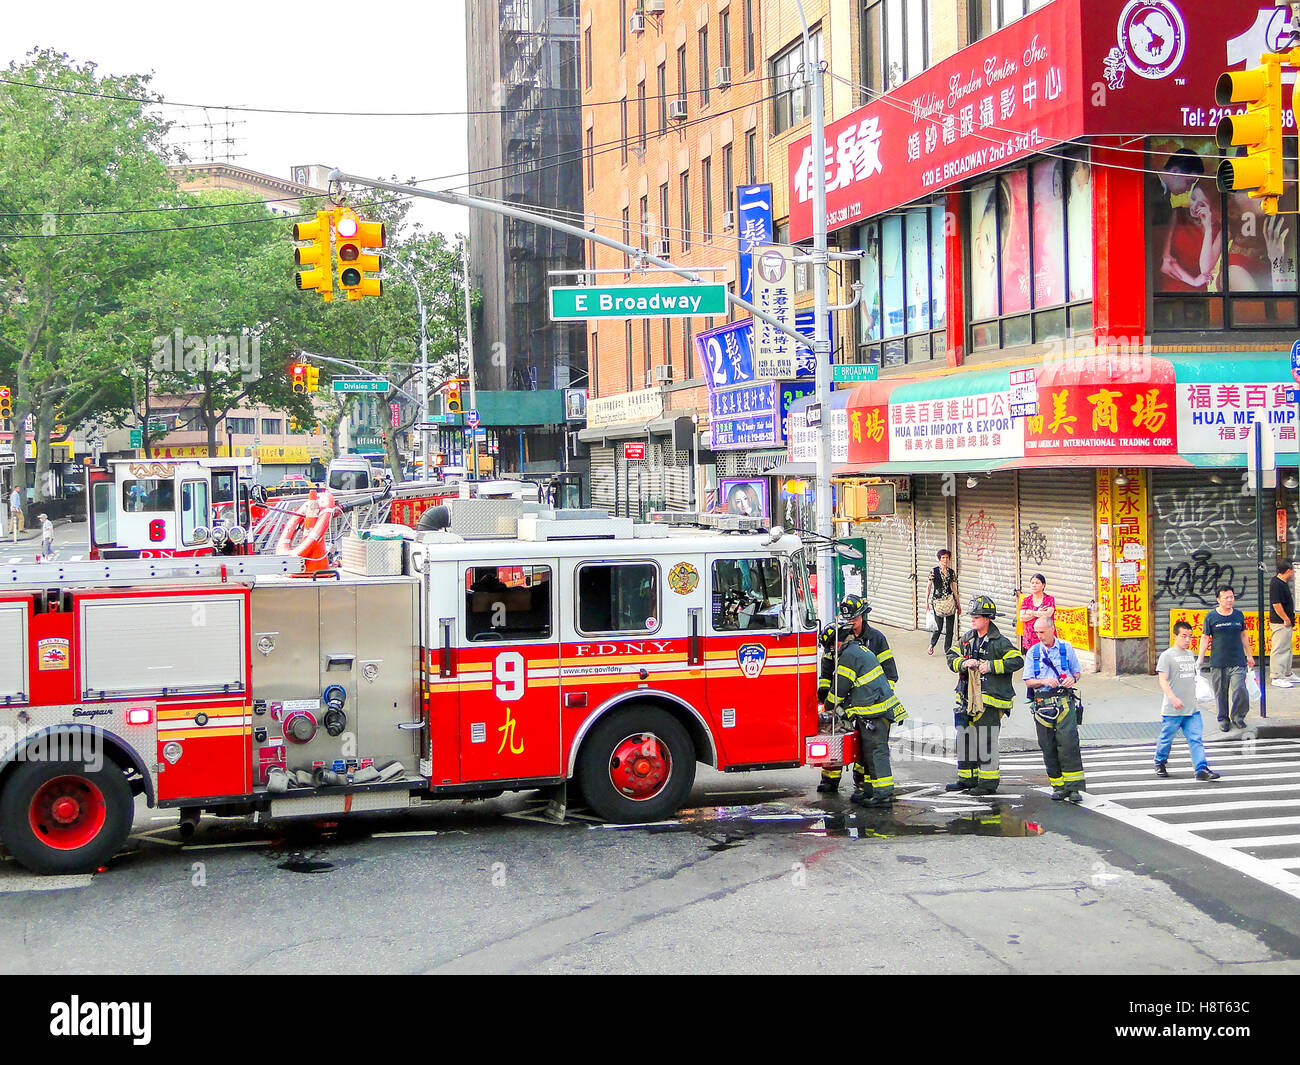 FDNY firefighters at work in Chinatown East Broadway Stock Photo